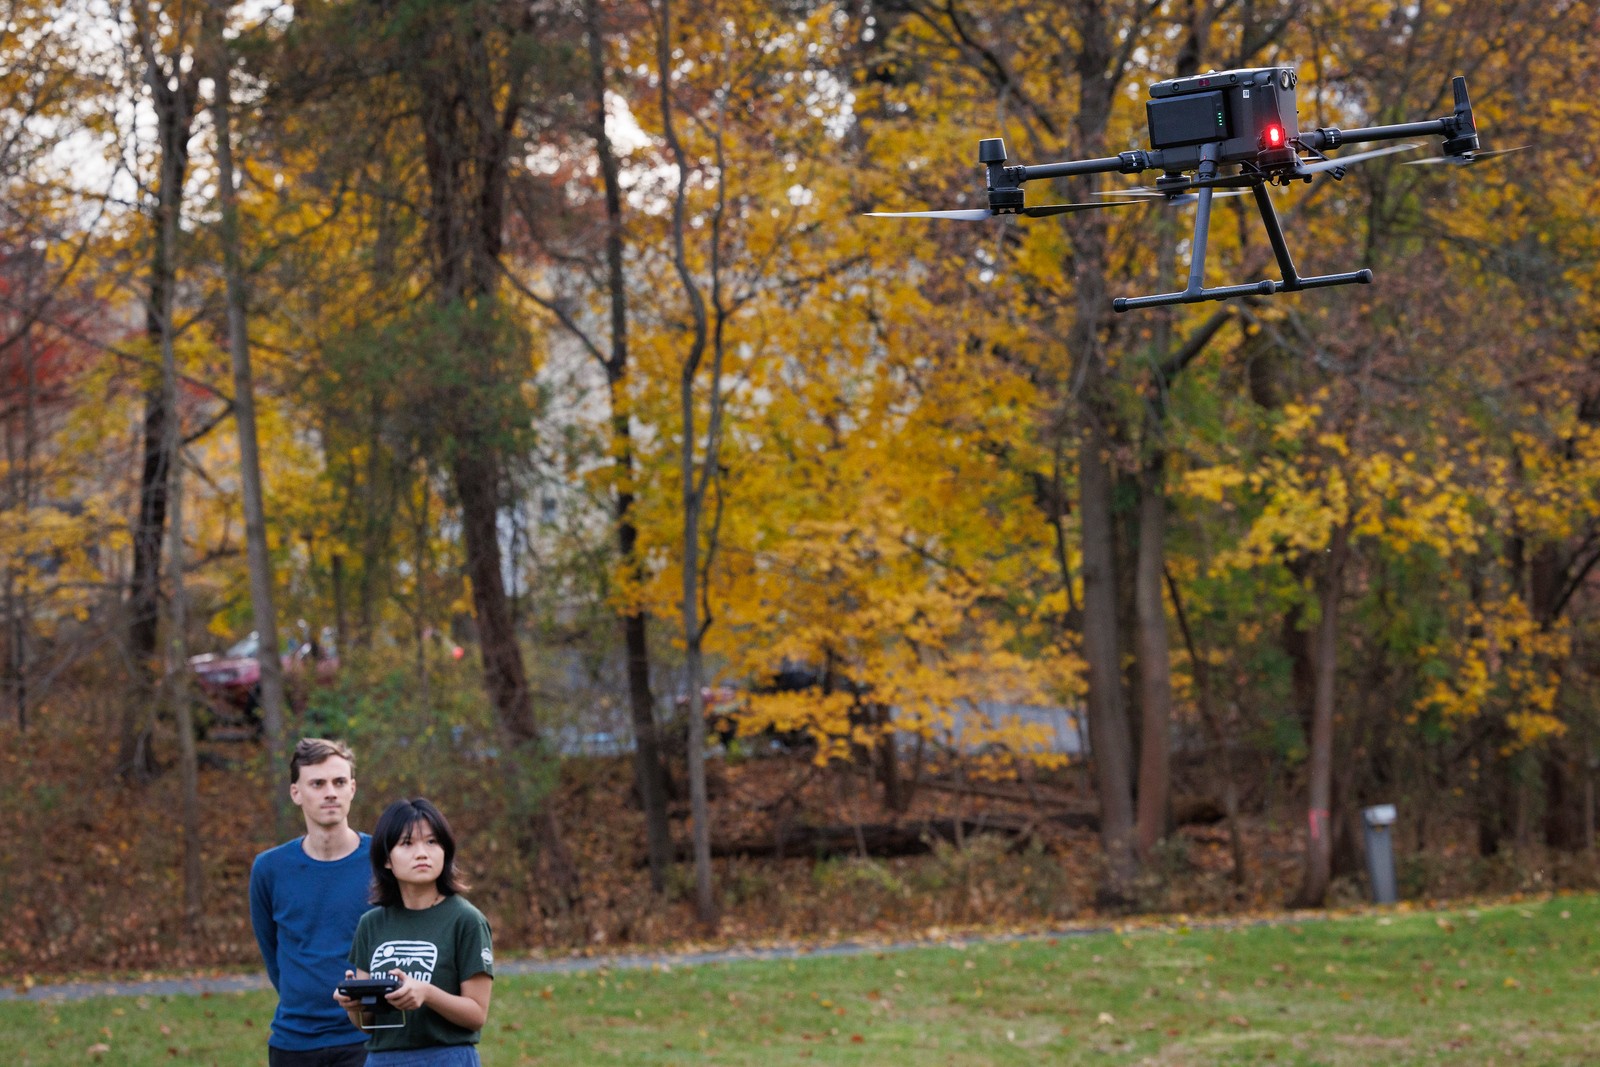 Andrew and Yuwei measure methane using sensors on a drone.